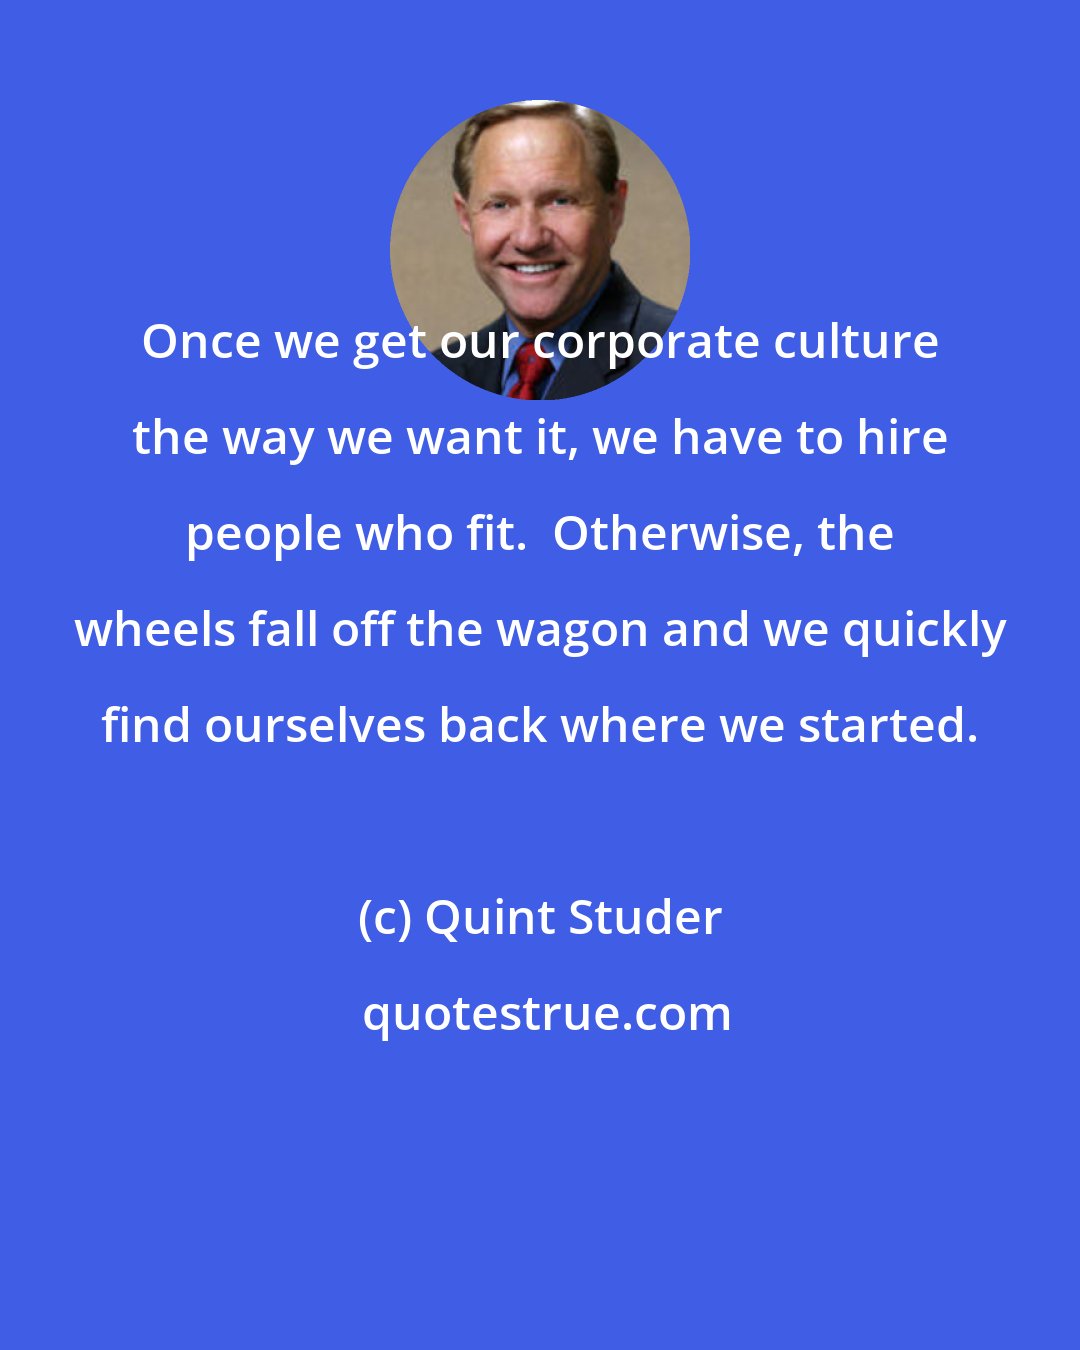 Quint Studer: Once we get our corporate culture the way we want it, we have to hire people who fit.  Otherwise, the wheels fall off the wagon and we quickly find ourselves back where we started.